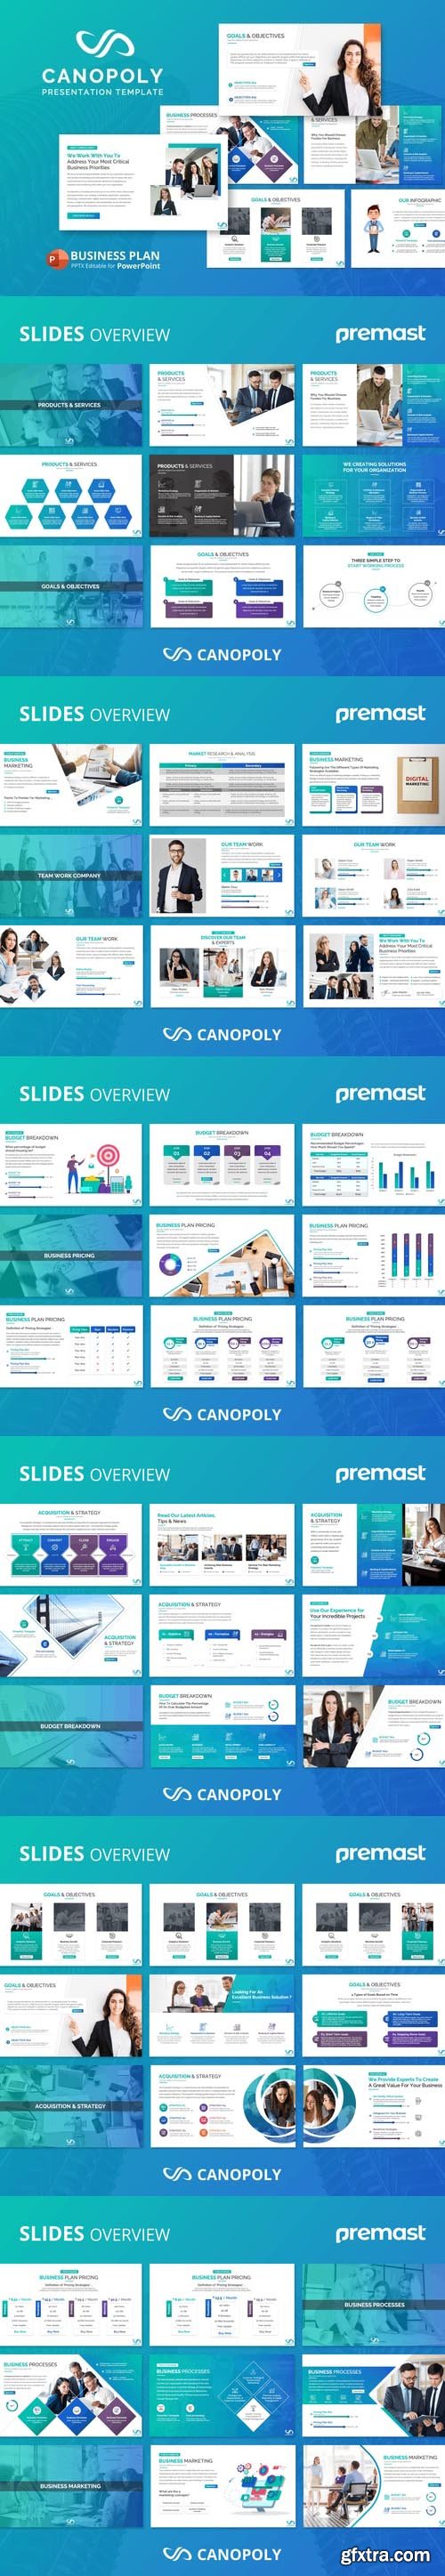 Canoply Business Plan Presentation Template